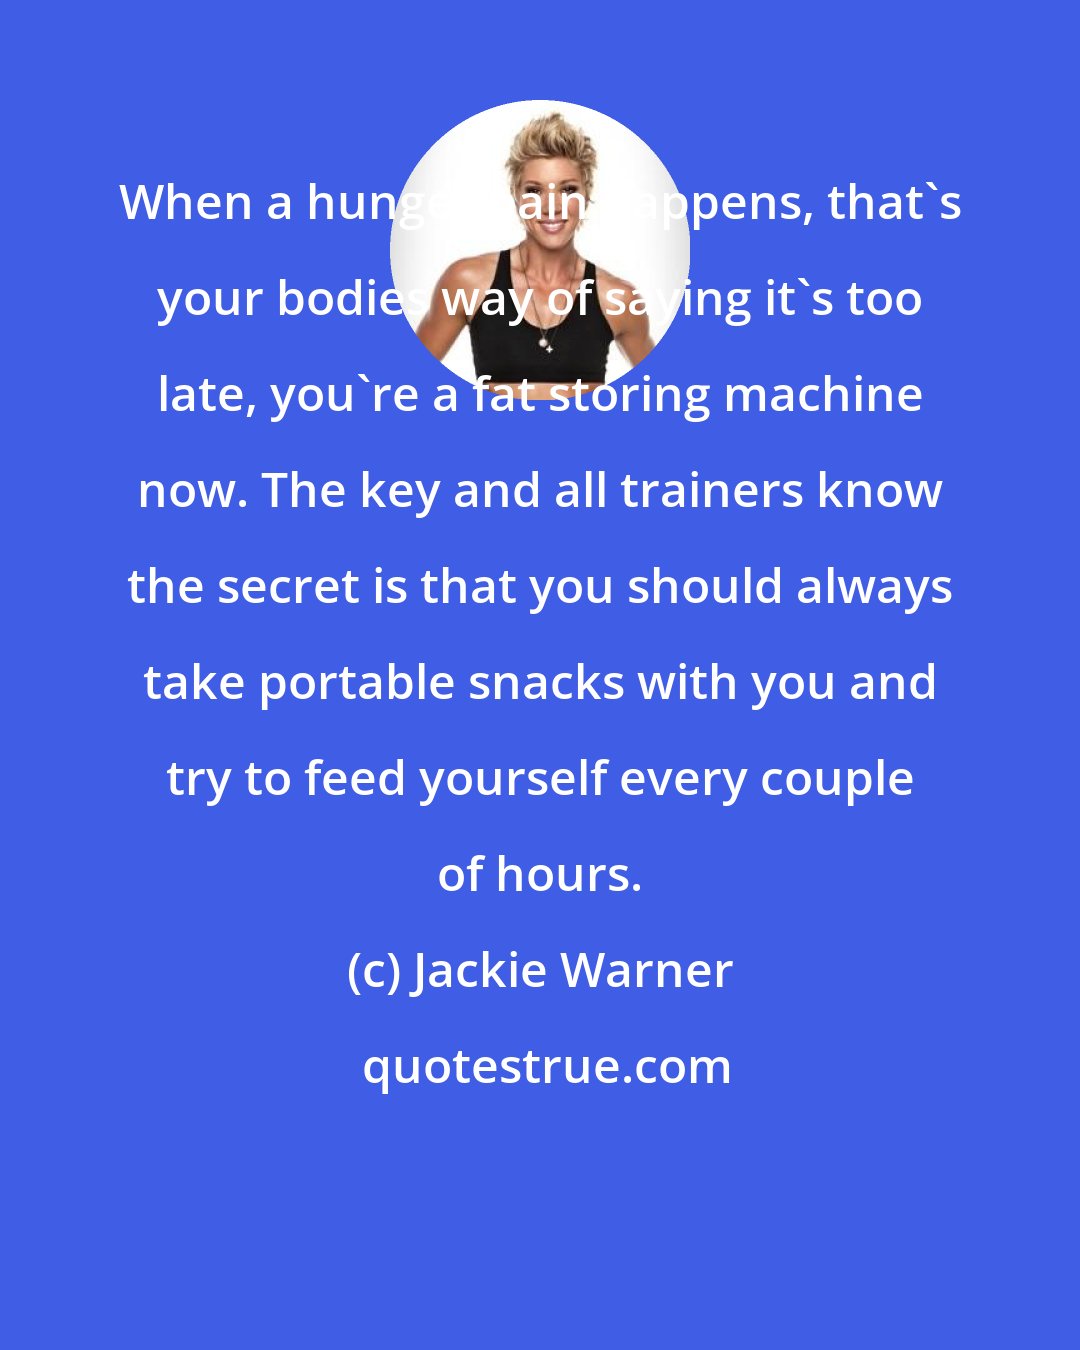 Jackie Warner: When a hunger pain happens, that's your bodies way of saying it's too late, you're a fat storing machine now. The key and all trainers know the secret is that you should always take portable snacks with you and try to feed yourself every couple of hours.